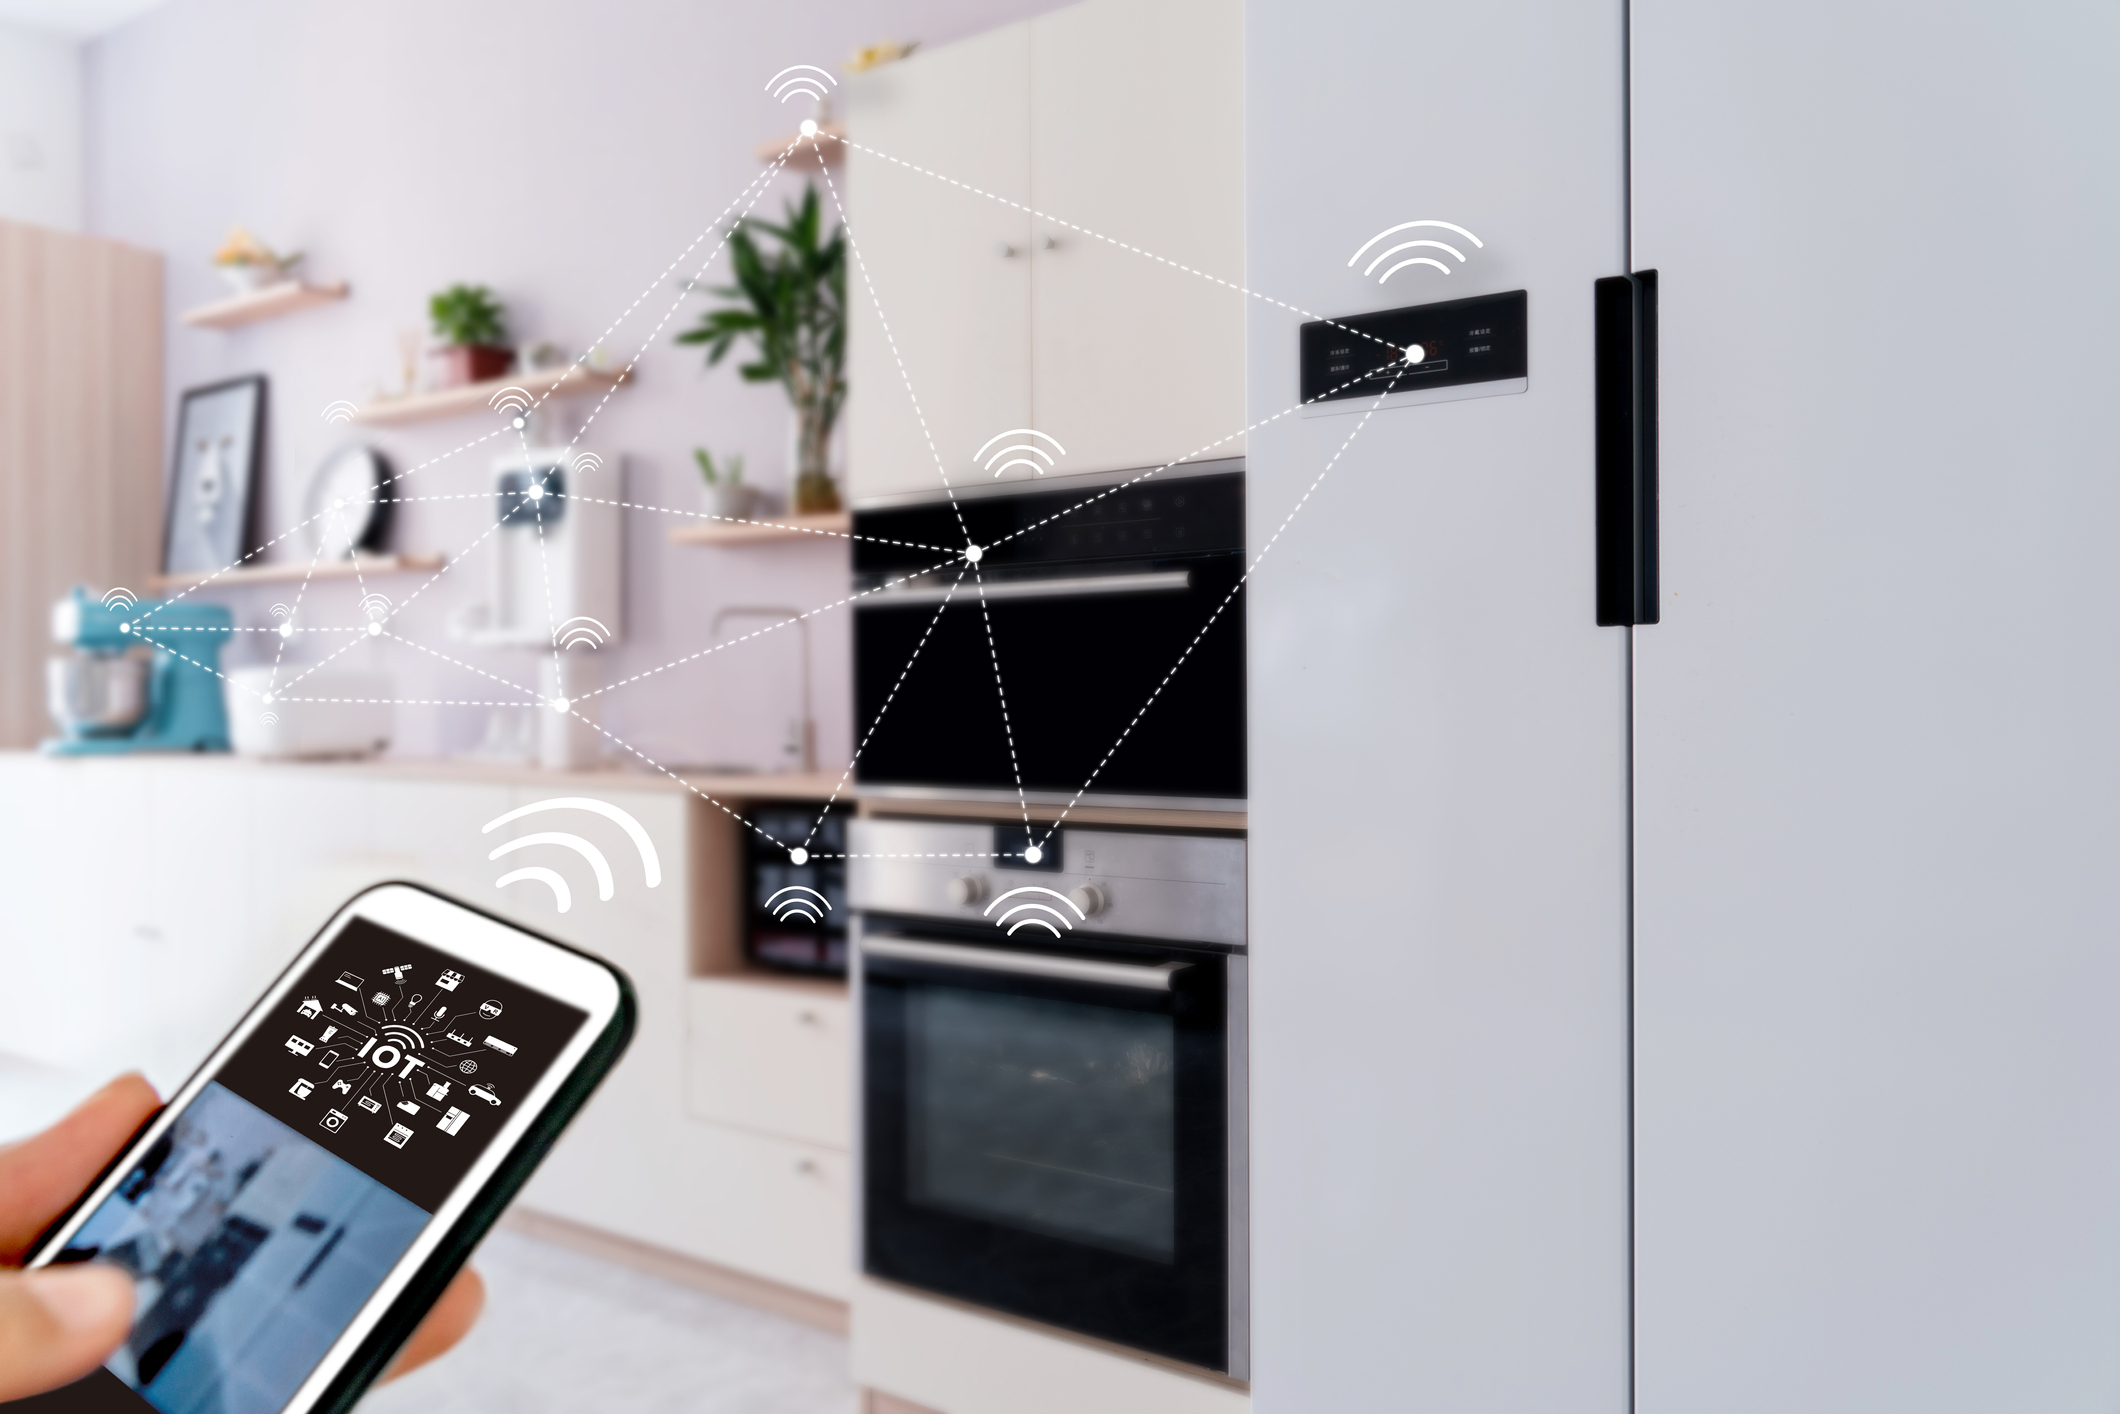 using phone to control kitchen appliances